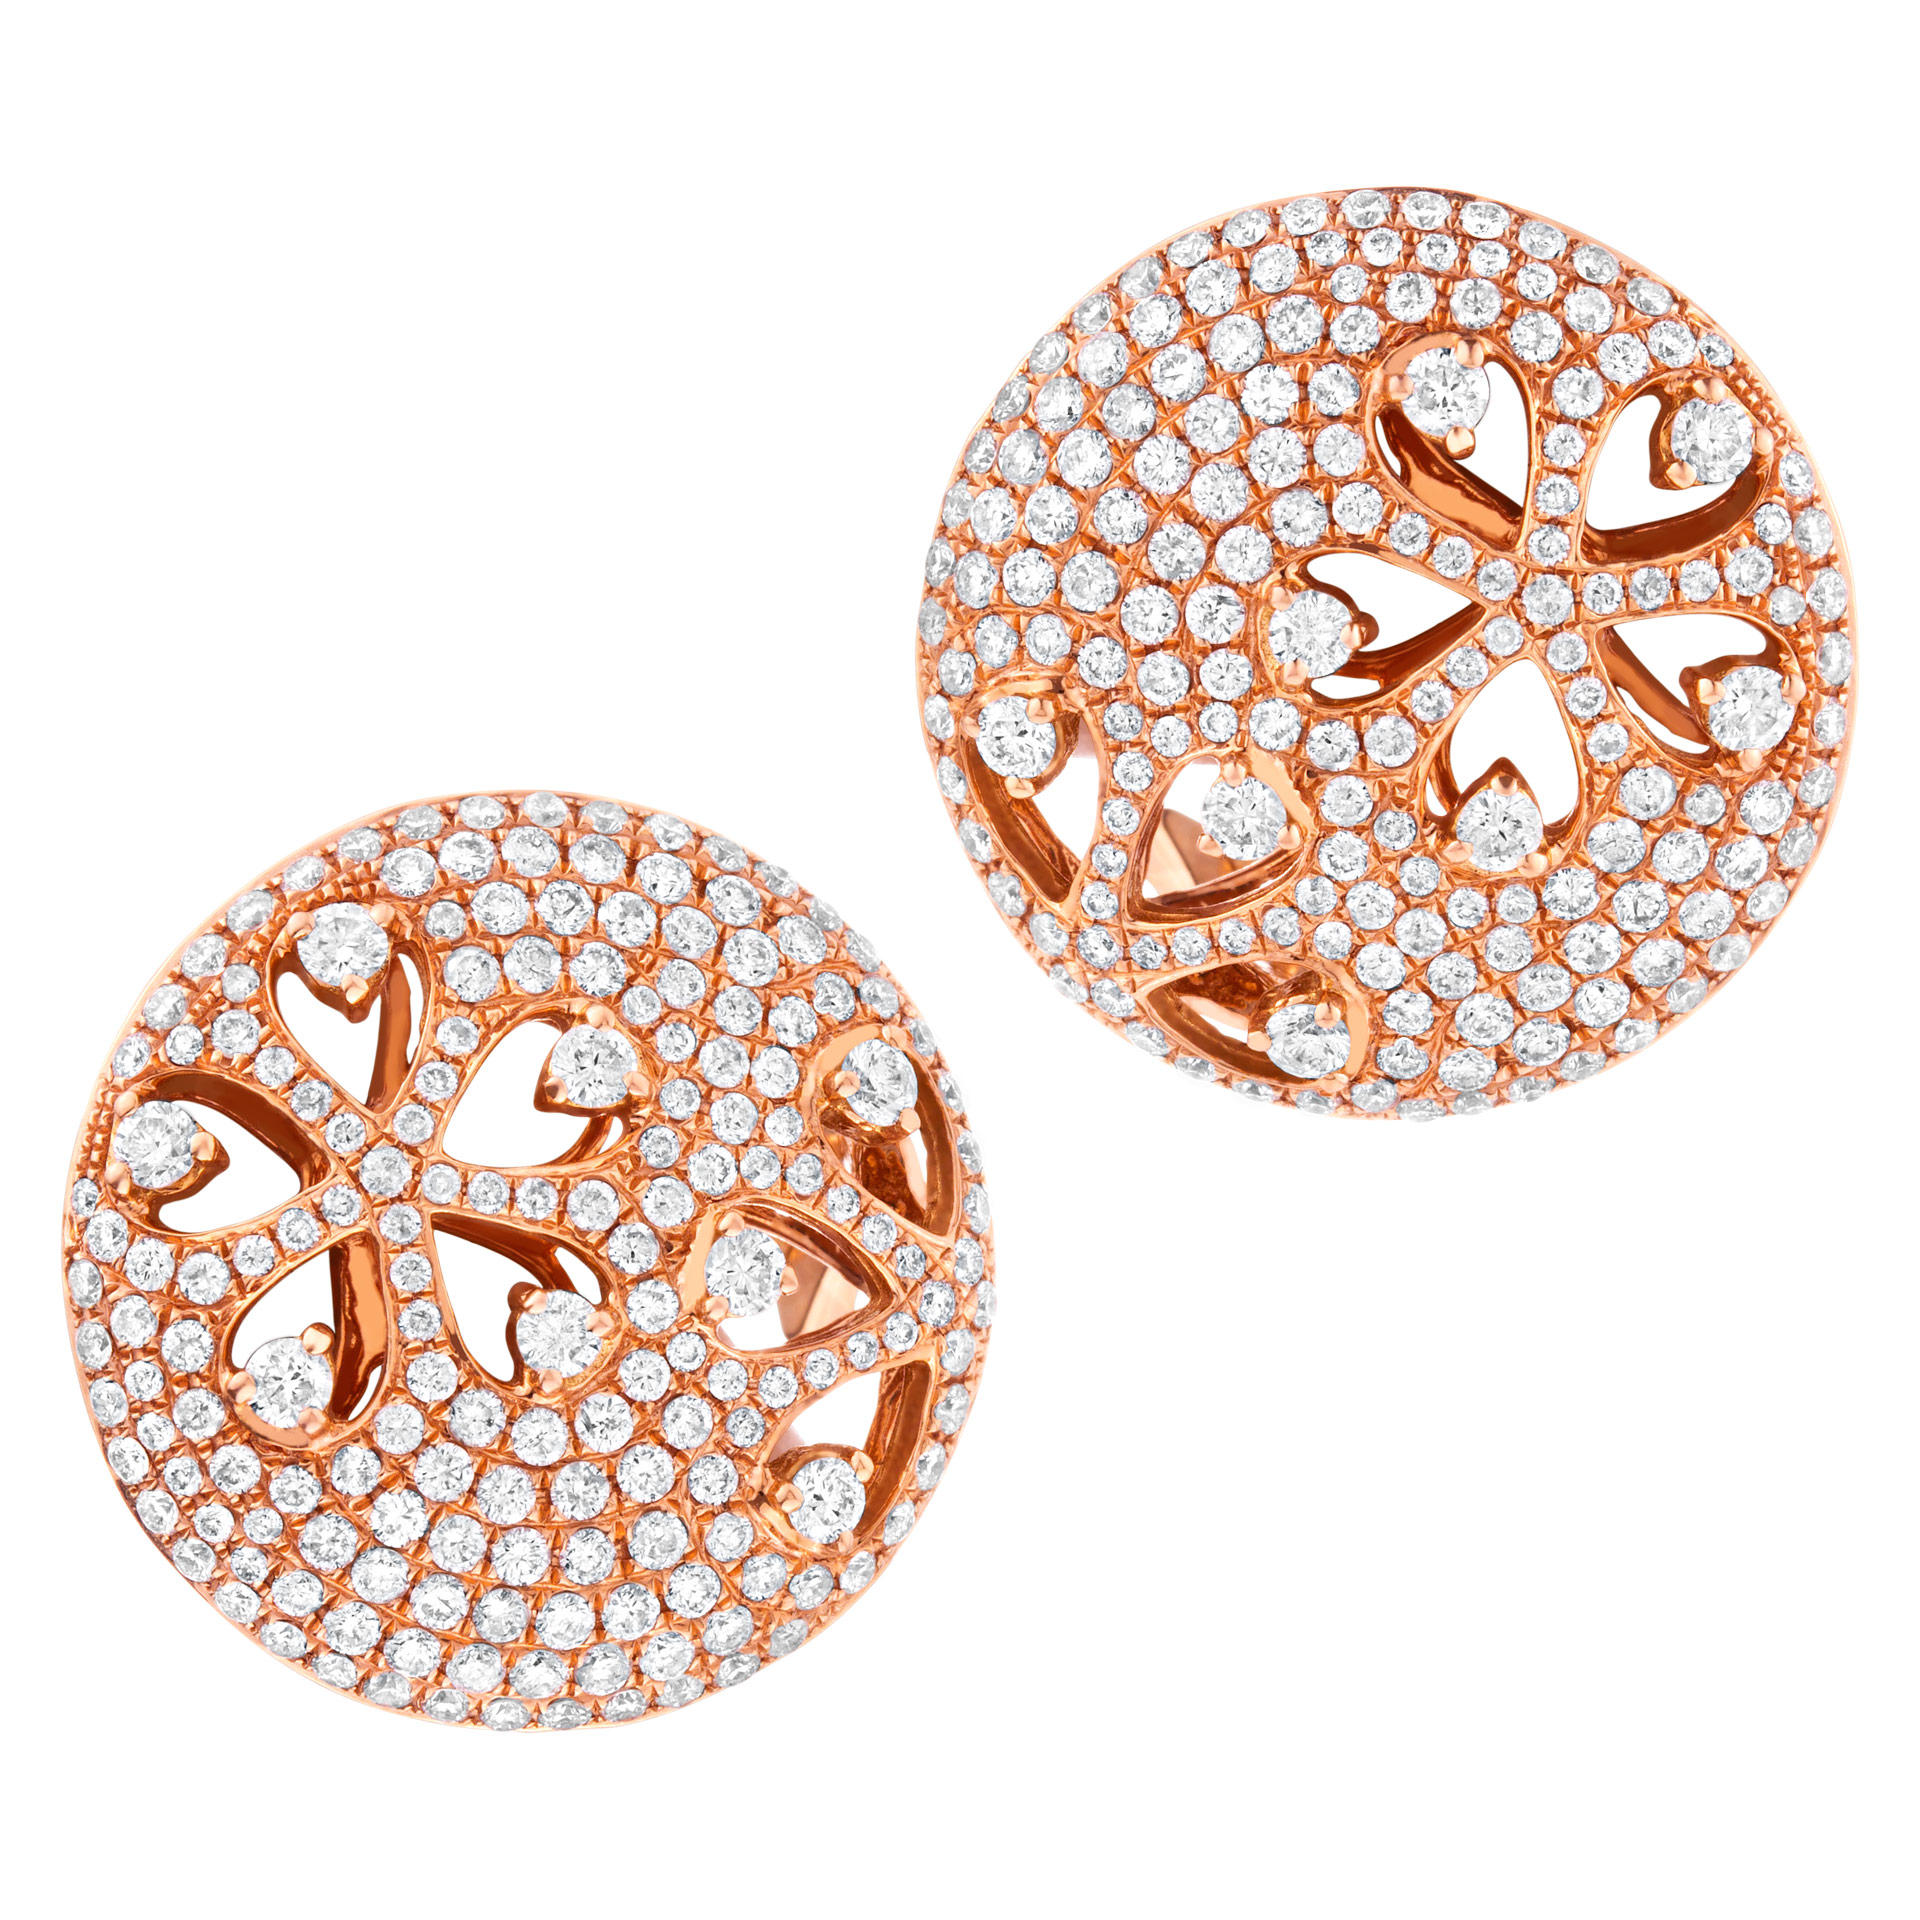 Round pave diamond earrings in 18k rose gold image 1